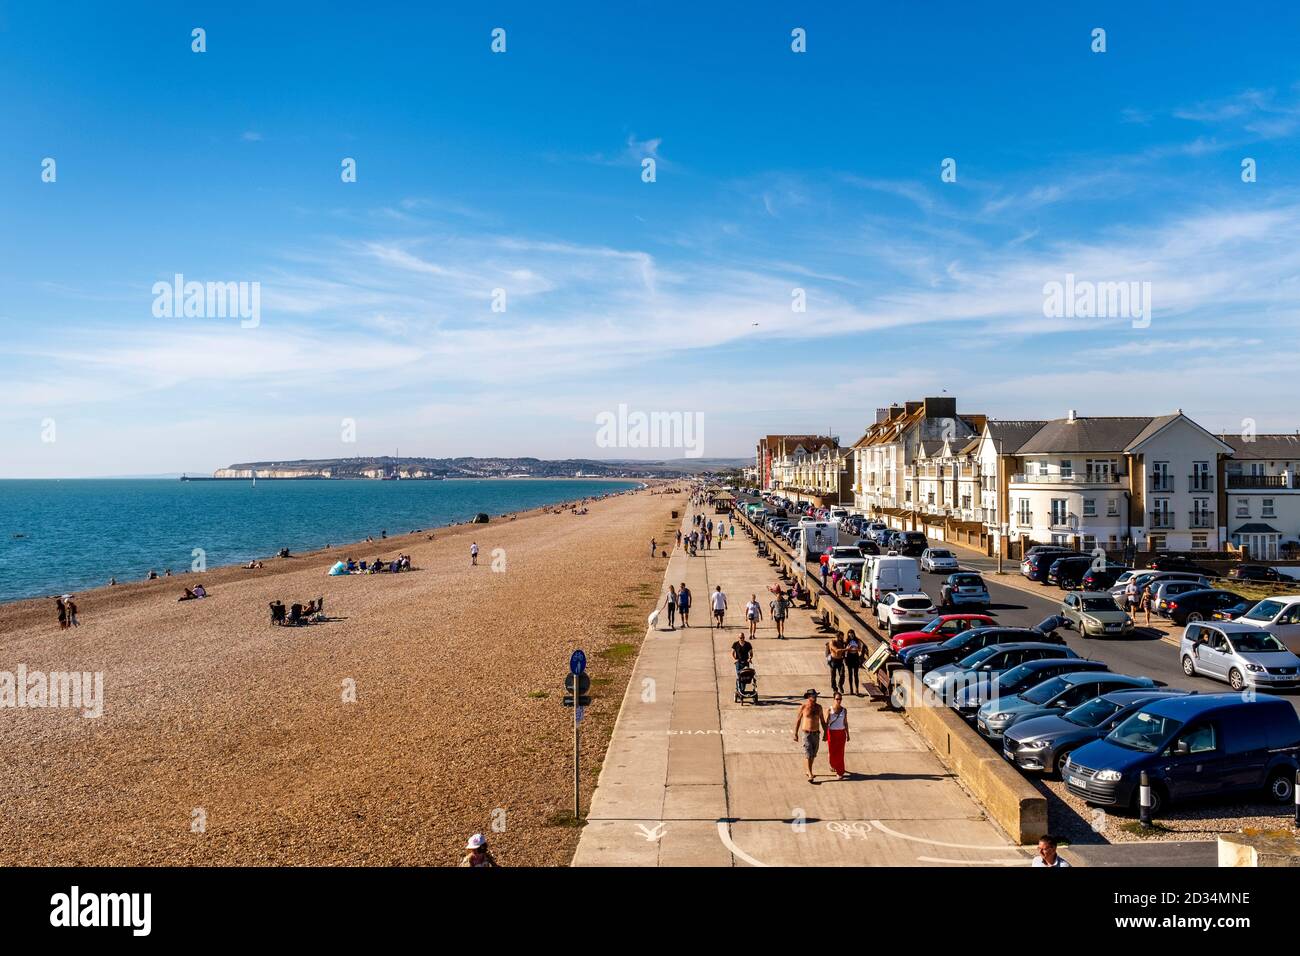 Seaford Beach, Seaford, East Sussex, Royaume-Uni. Banque D'Images